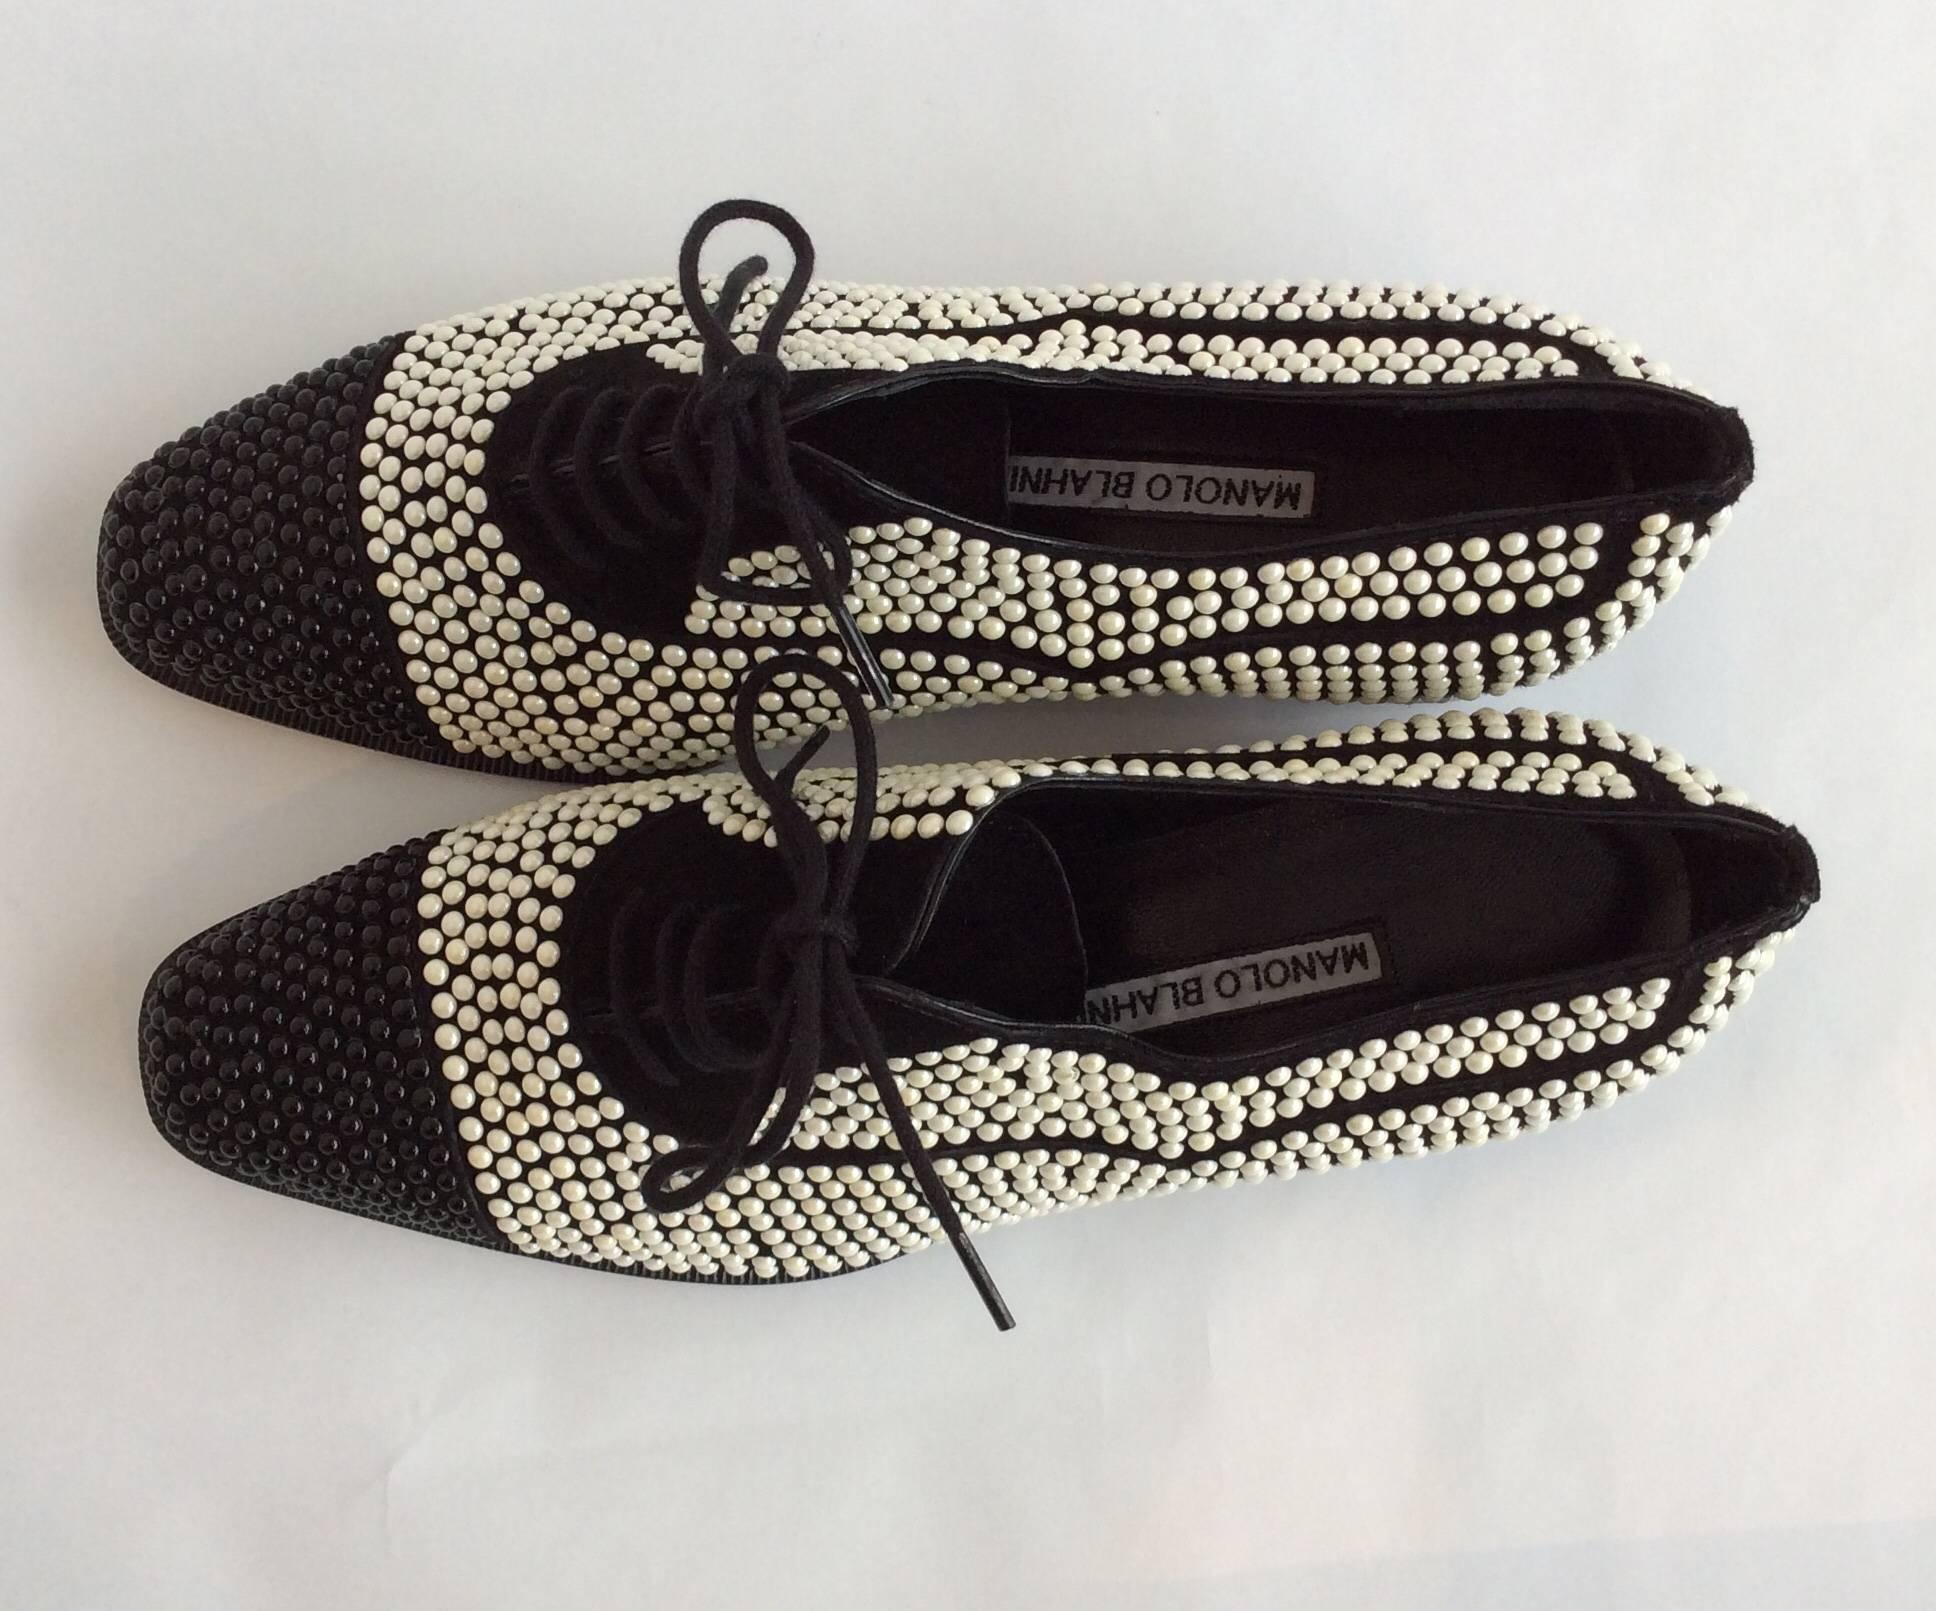 Manolo Blahnik White And Black Pearls Covered Brogues Sz37 1